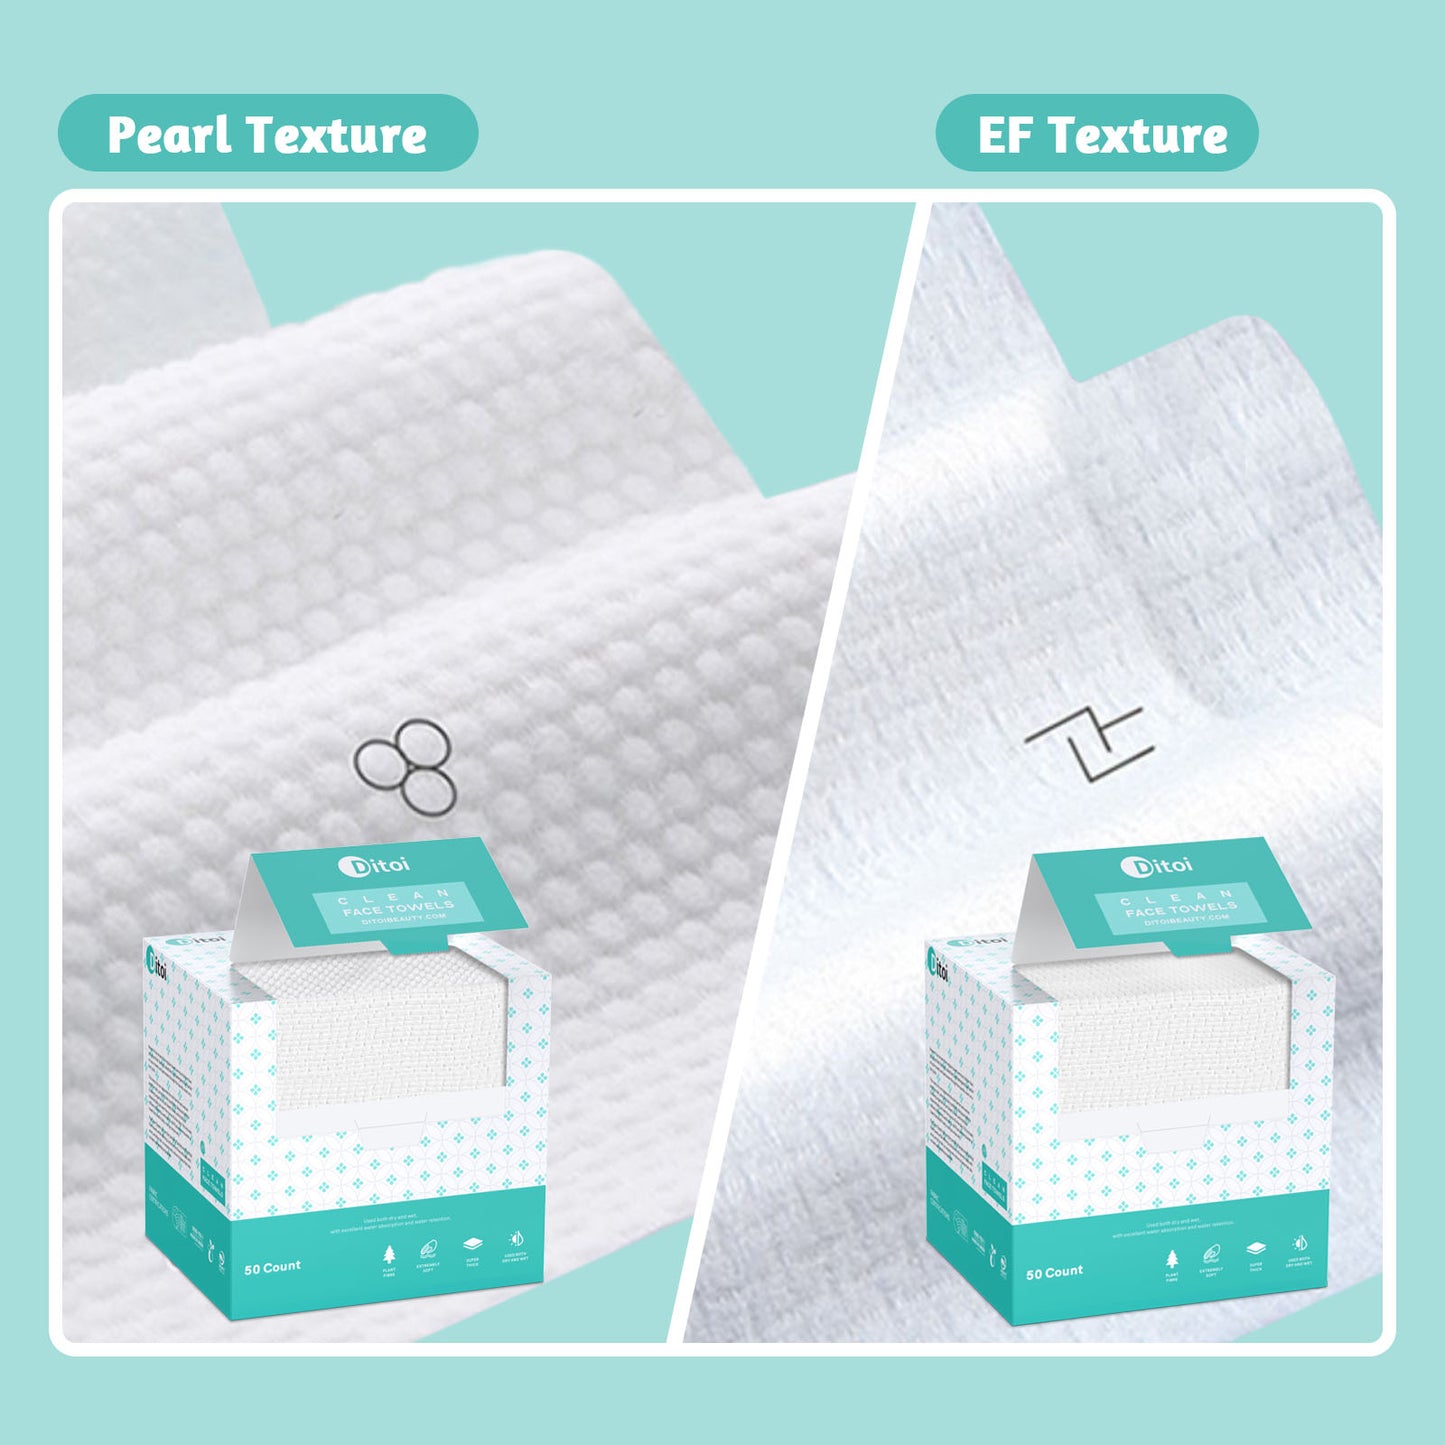 Ditoi Pearl Texture Disposable Face Towels 50pcs (1 Pack)